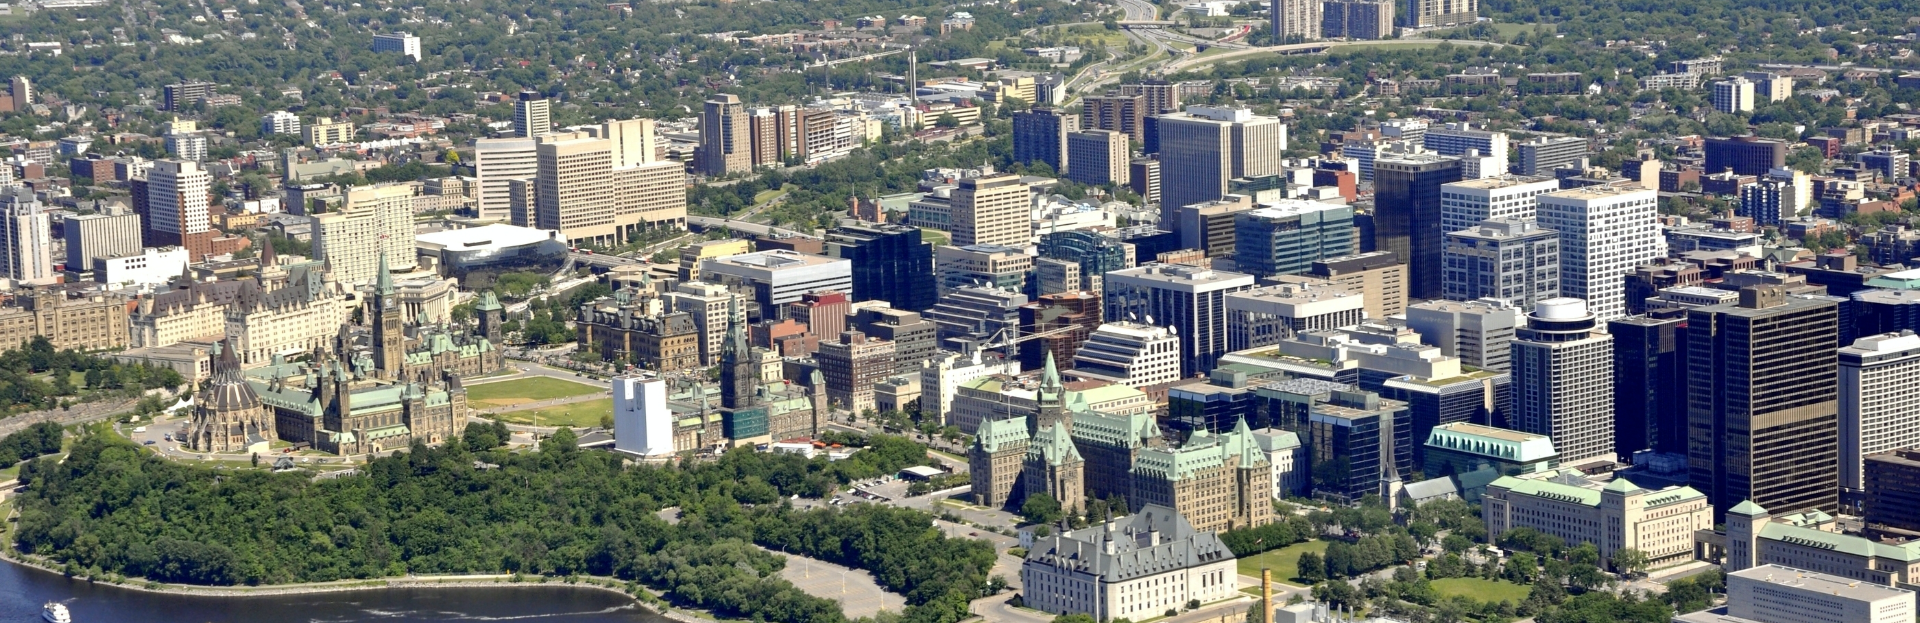 Bird's eye view of city with buildings and parks visible.